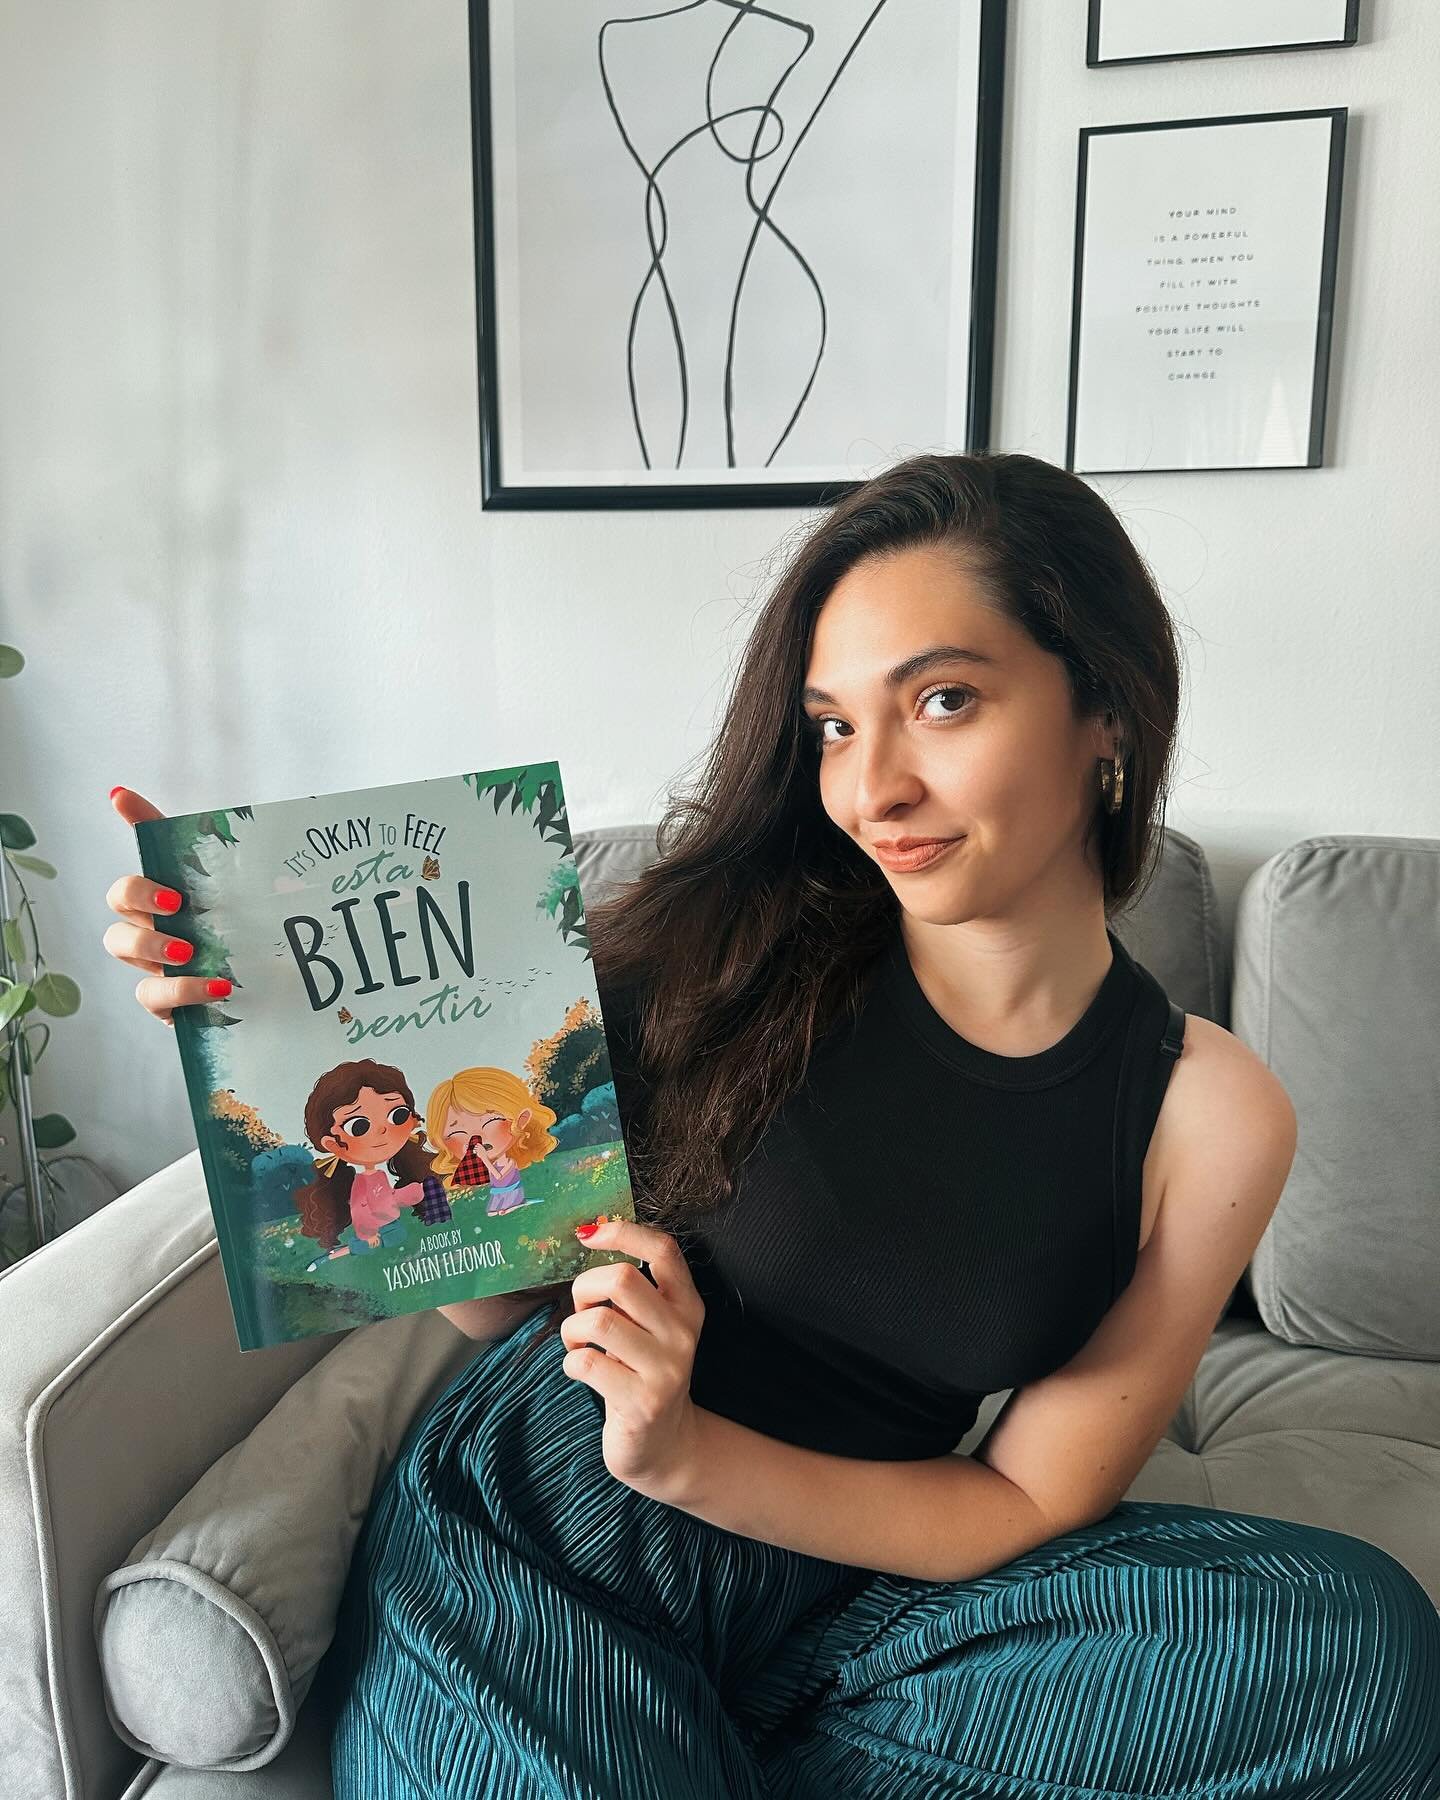 I&rsquo;ve been keeping a little secret for a while now&hellip;.🤰🏽

Introducing the birth of my new baby, my first children&rsquo;s book &ldquo;It&rsquo;s Okay To Feel&rdquo; written in both English and Spanish + featuring my two incredible nieces,